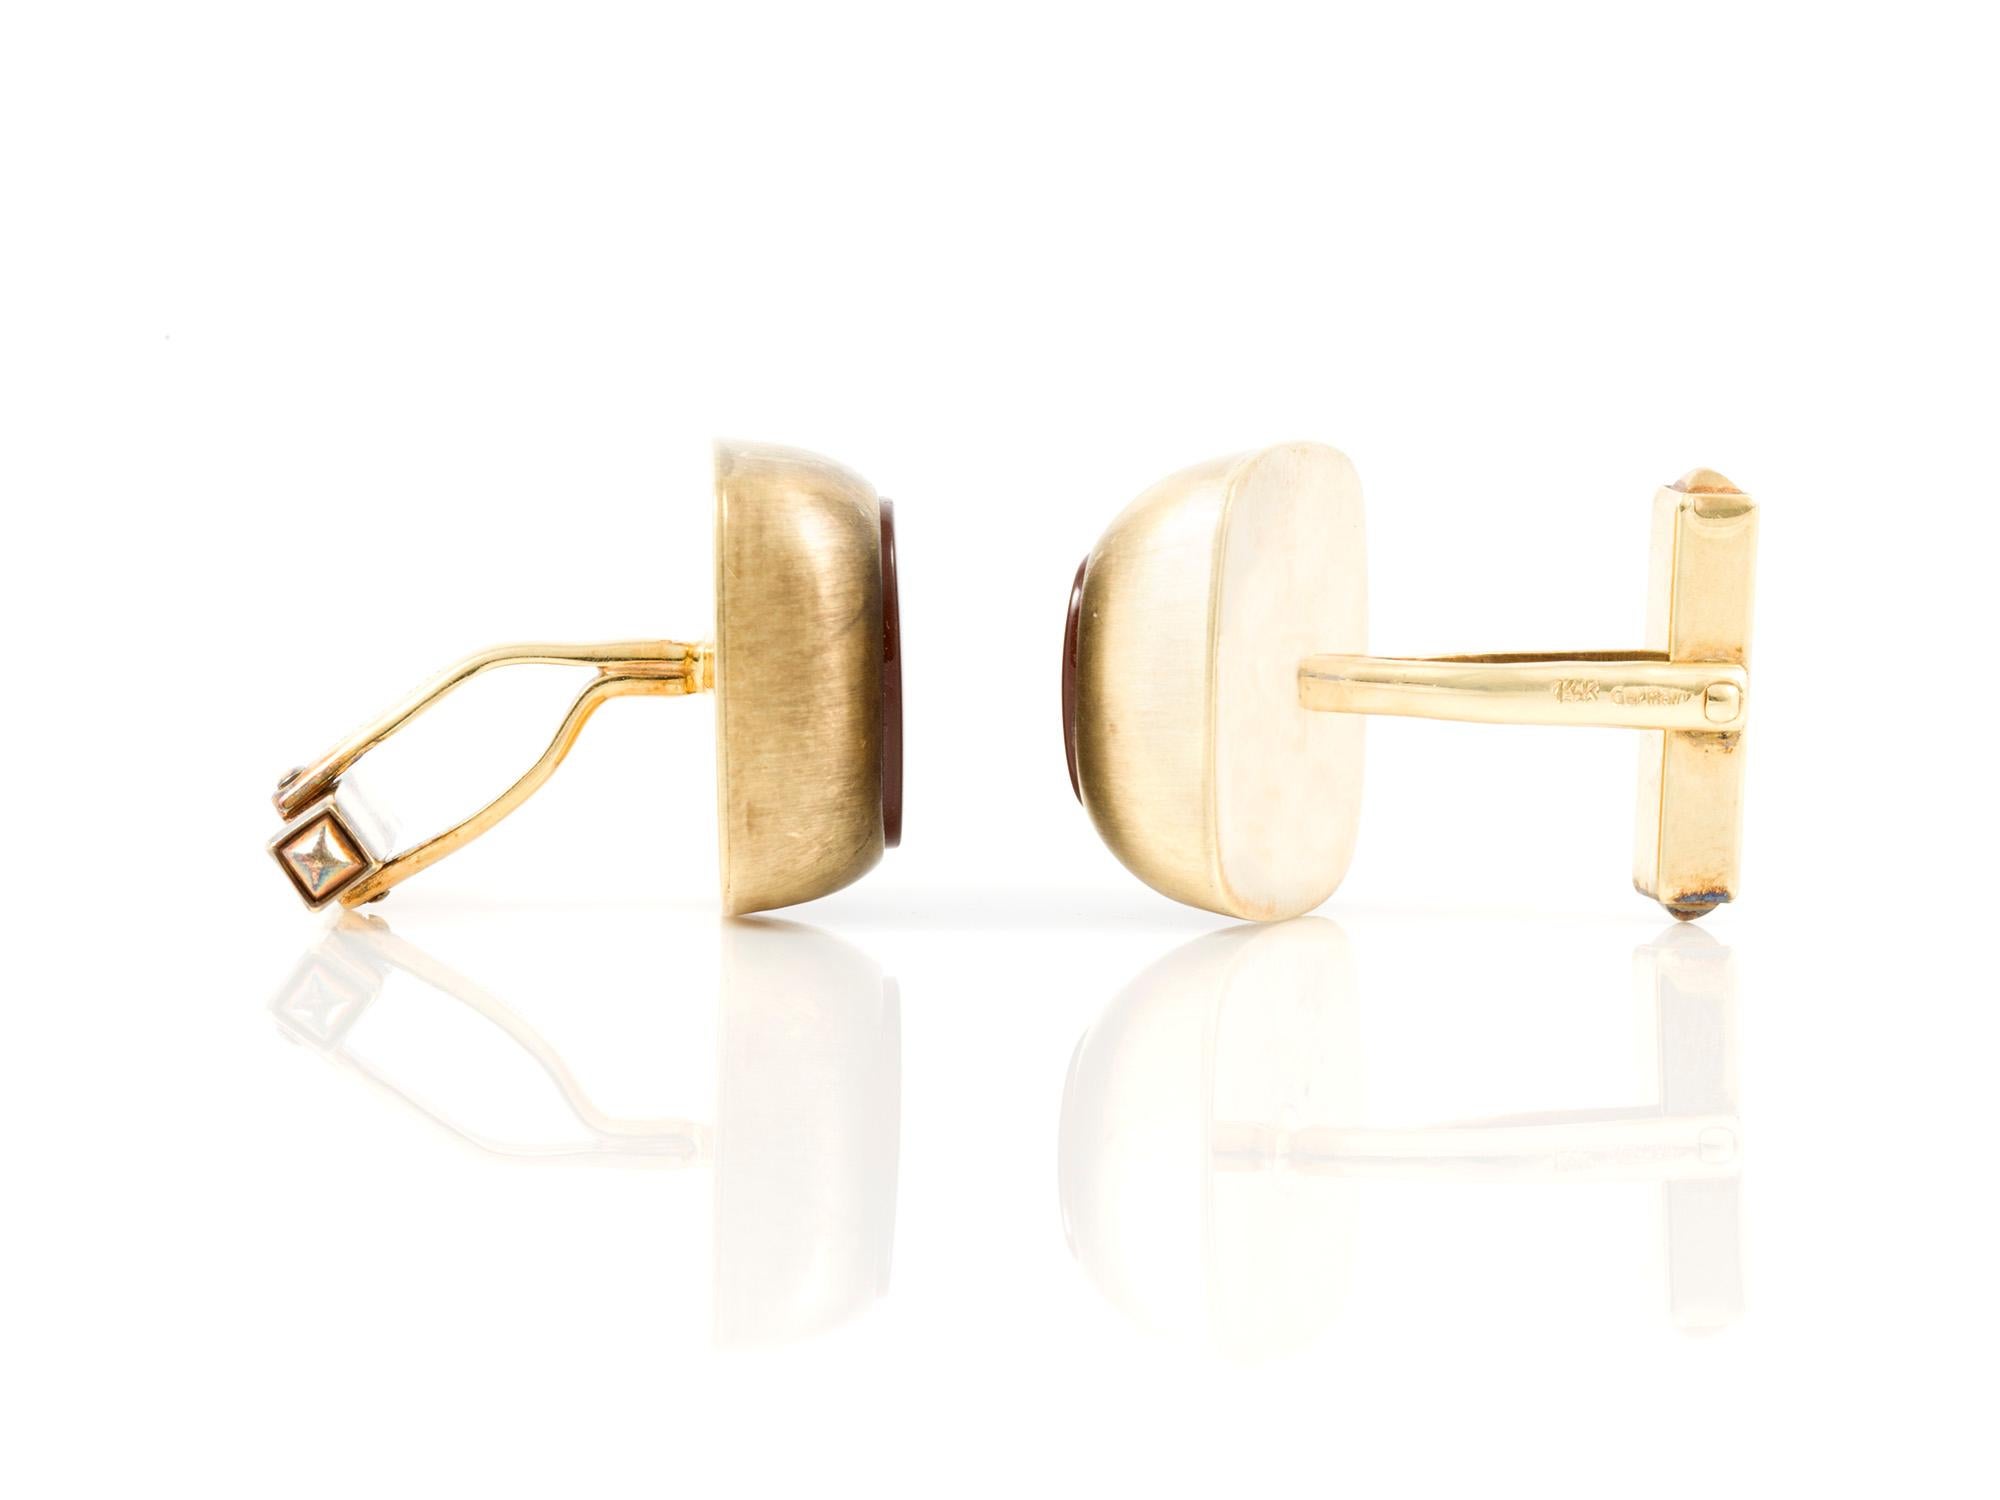 Carnelian cufflinks finely crafted in 14k yellow gold.